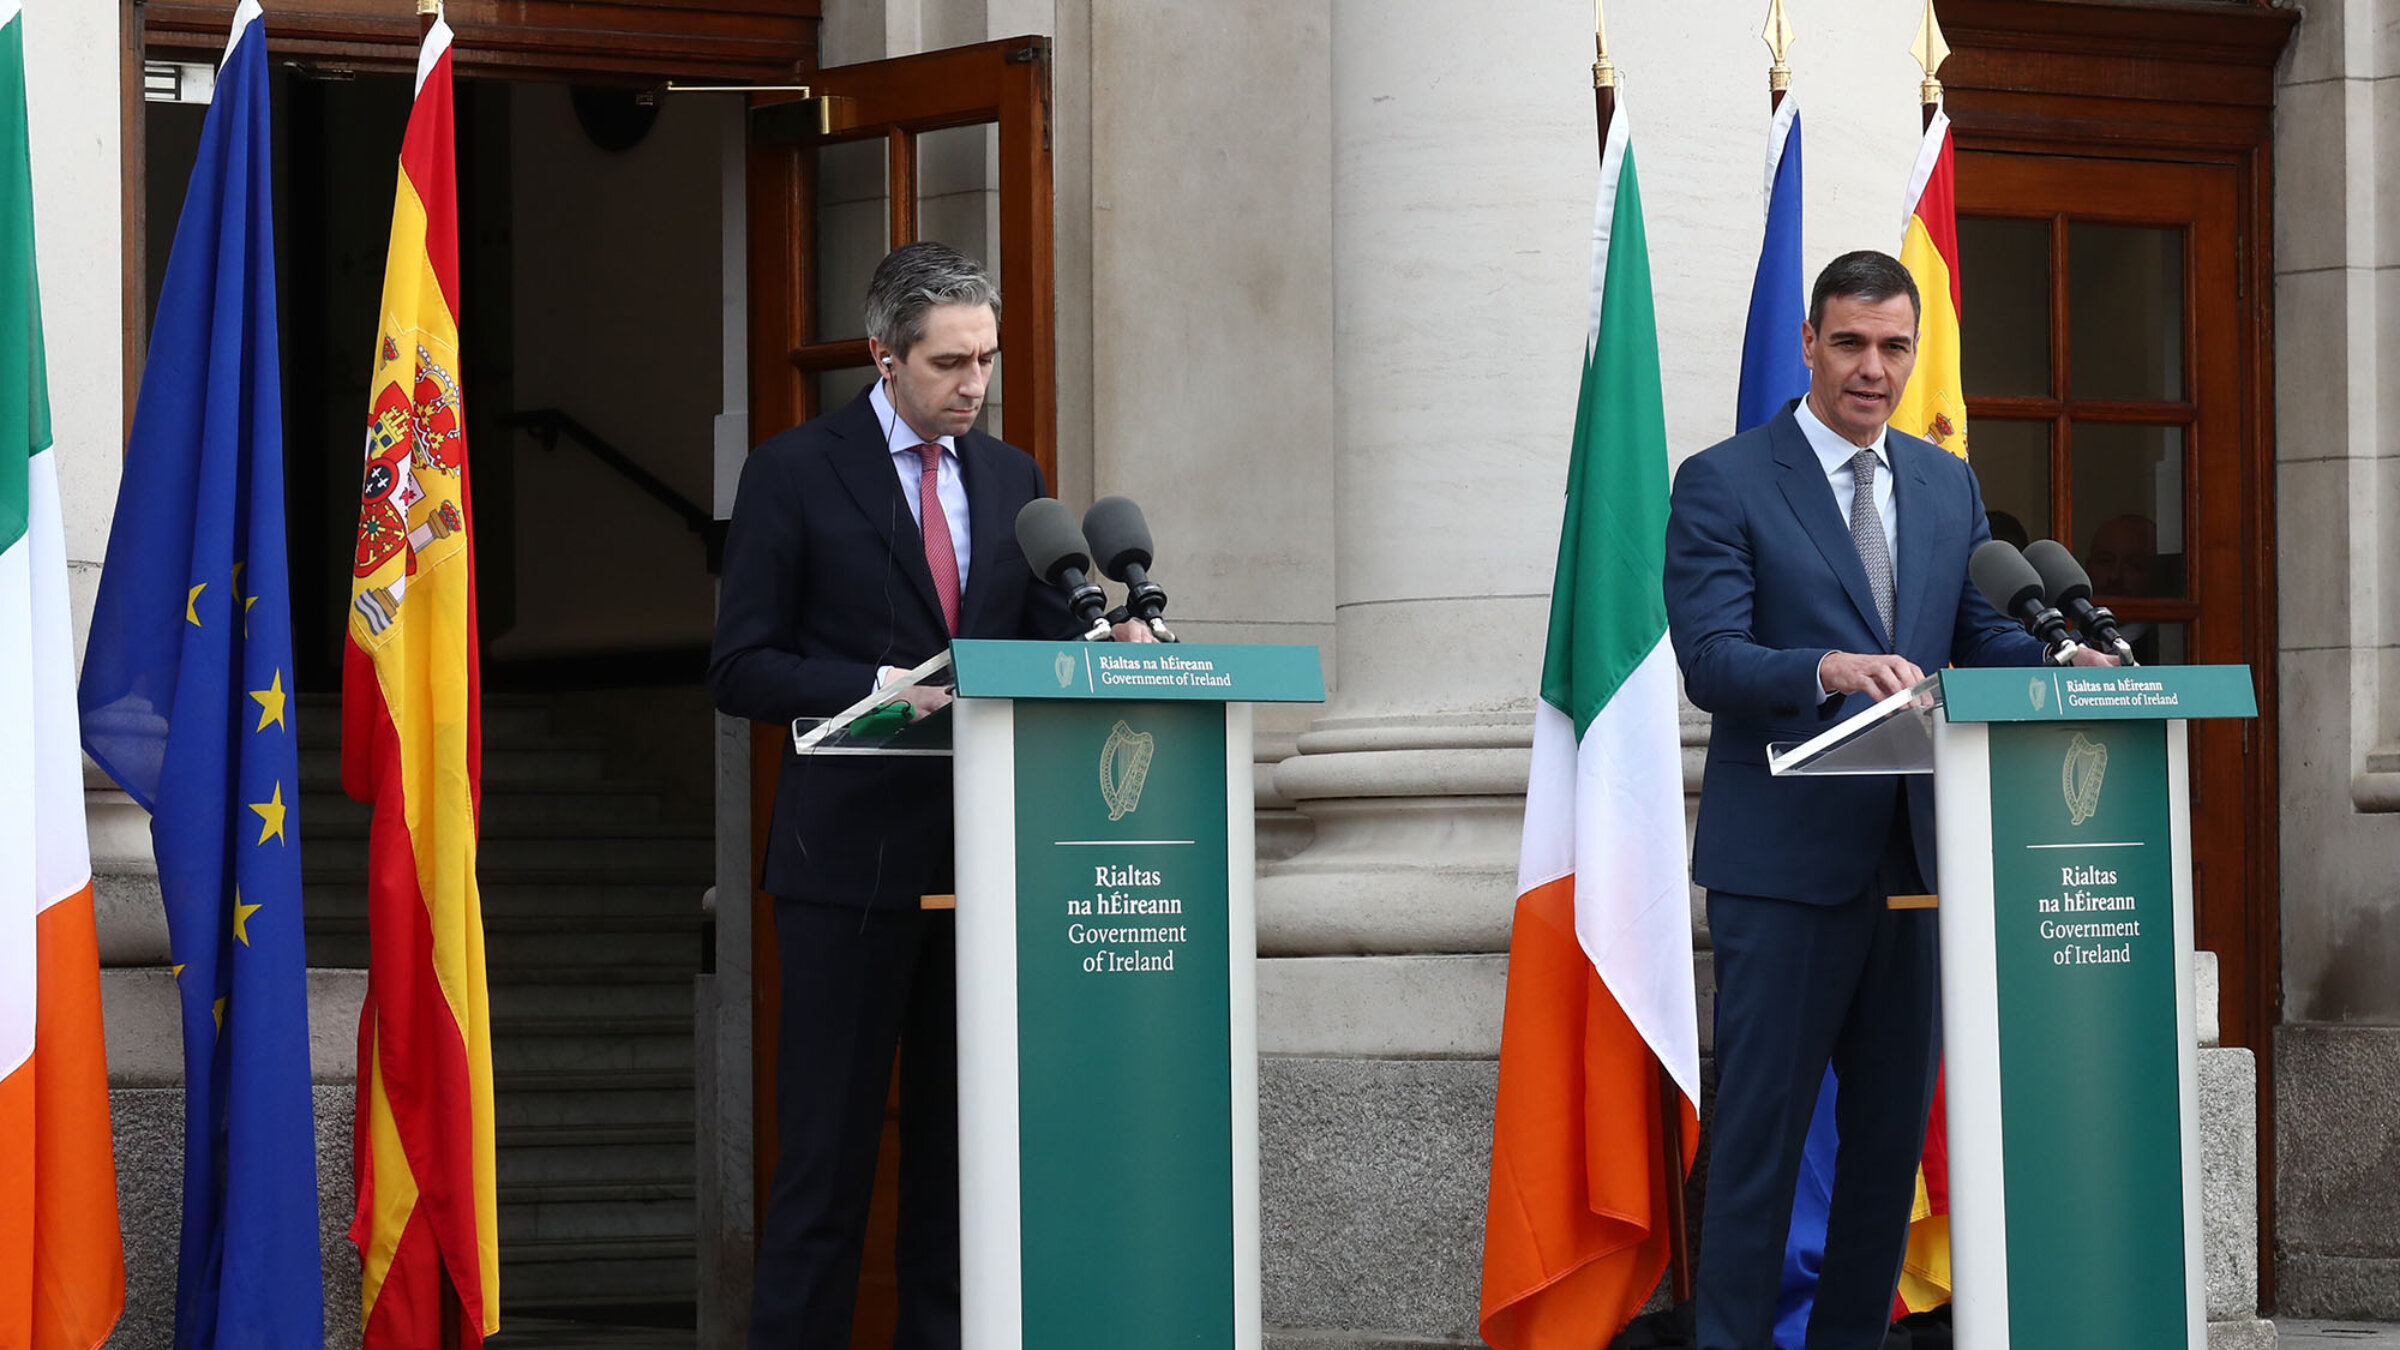 Spanish President Pedro Sanchez (R) and Irish Prime Minister Simon Harris speak to the press after an April meeting in Dublin at which they expressed willingness to endorse a Palestinian state.